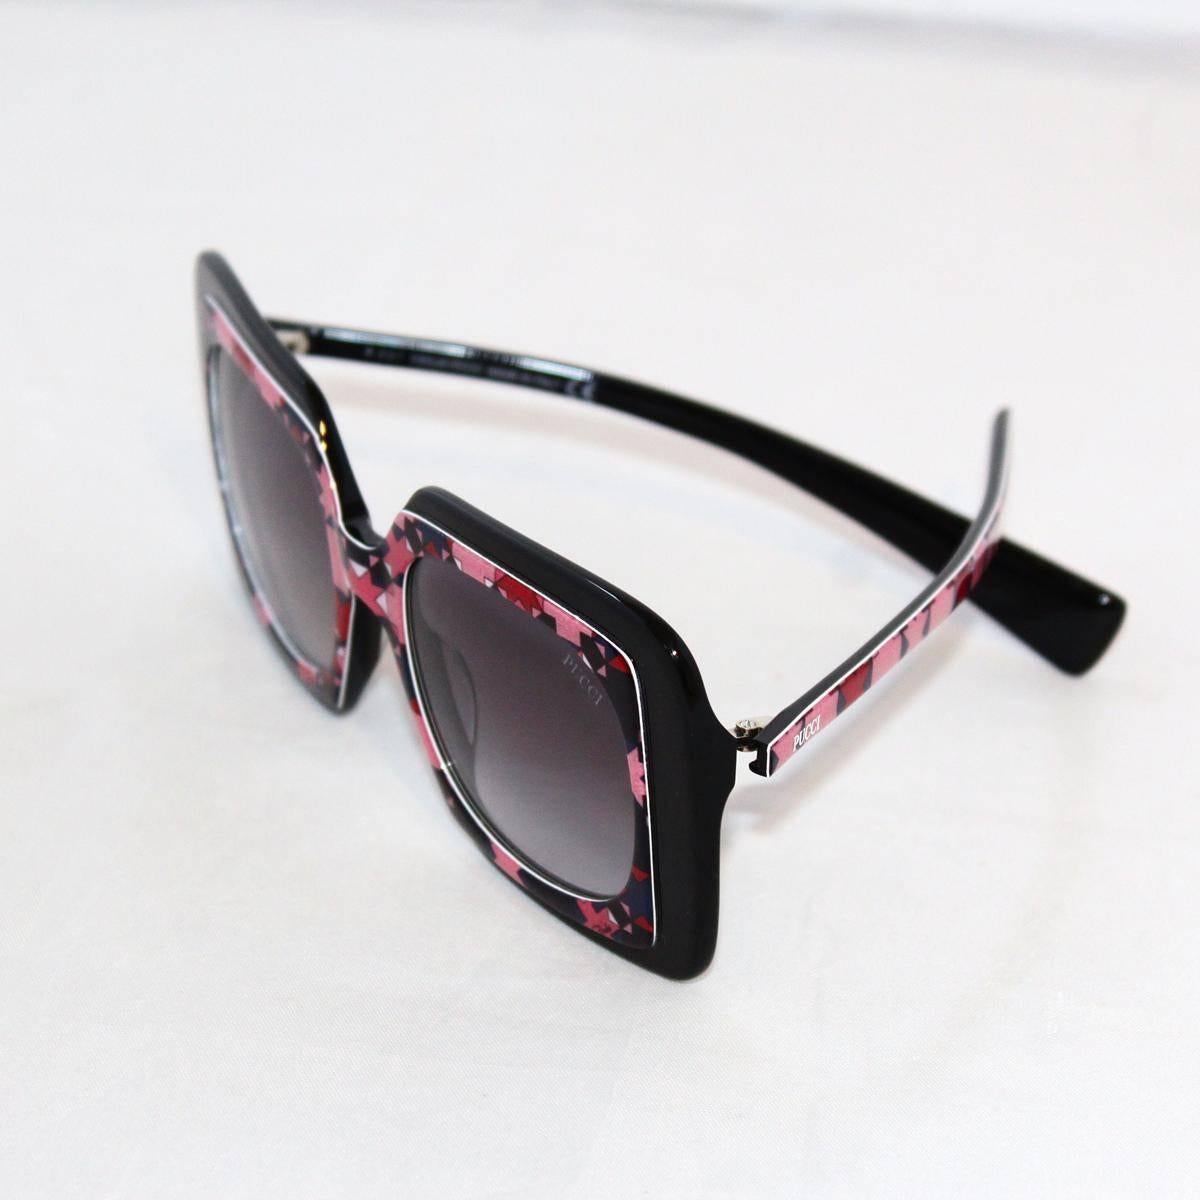 Lovely brand new Emilio Pucci sunglasses
EP 0079/S 05b
Multicolored frame
RRecatngular lenses
Width cm 15 (5.9 inches)
Condition: New with case
Worldwide express shipping included in the price !